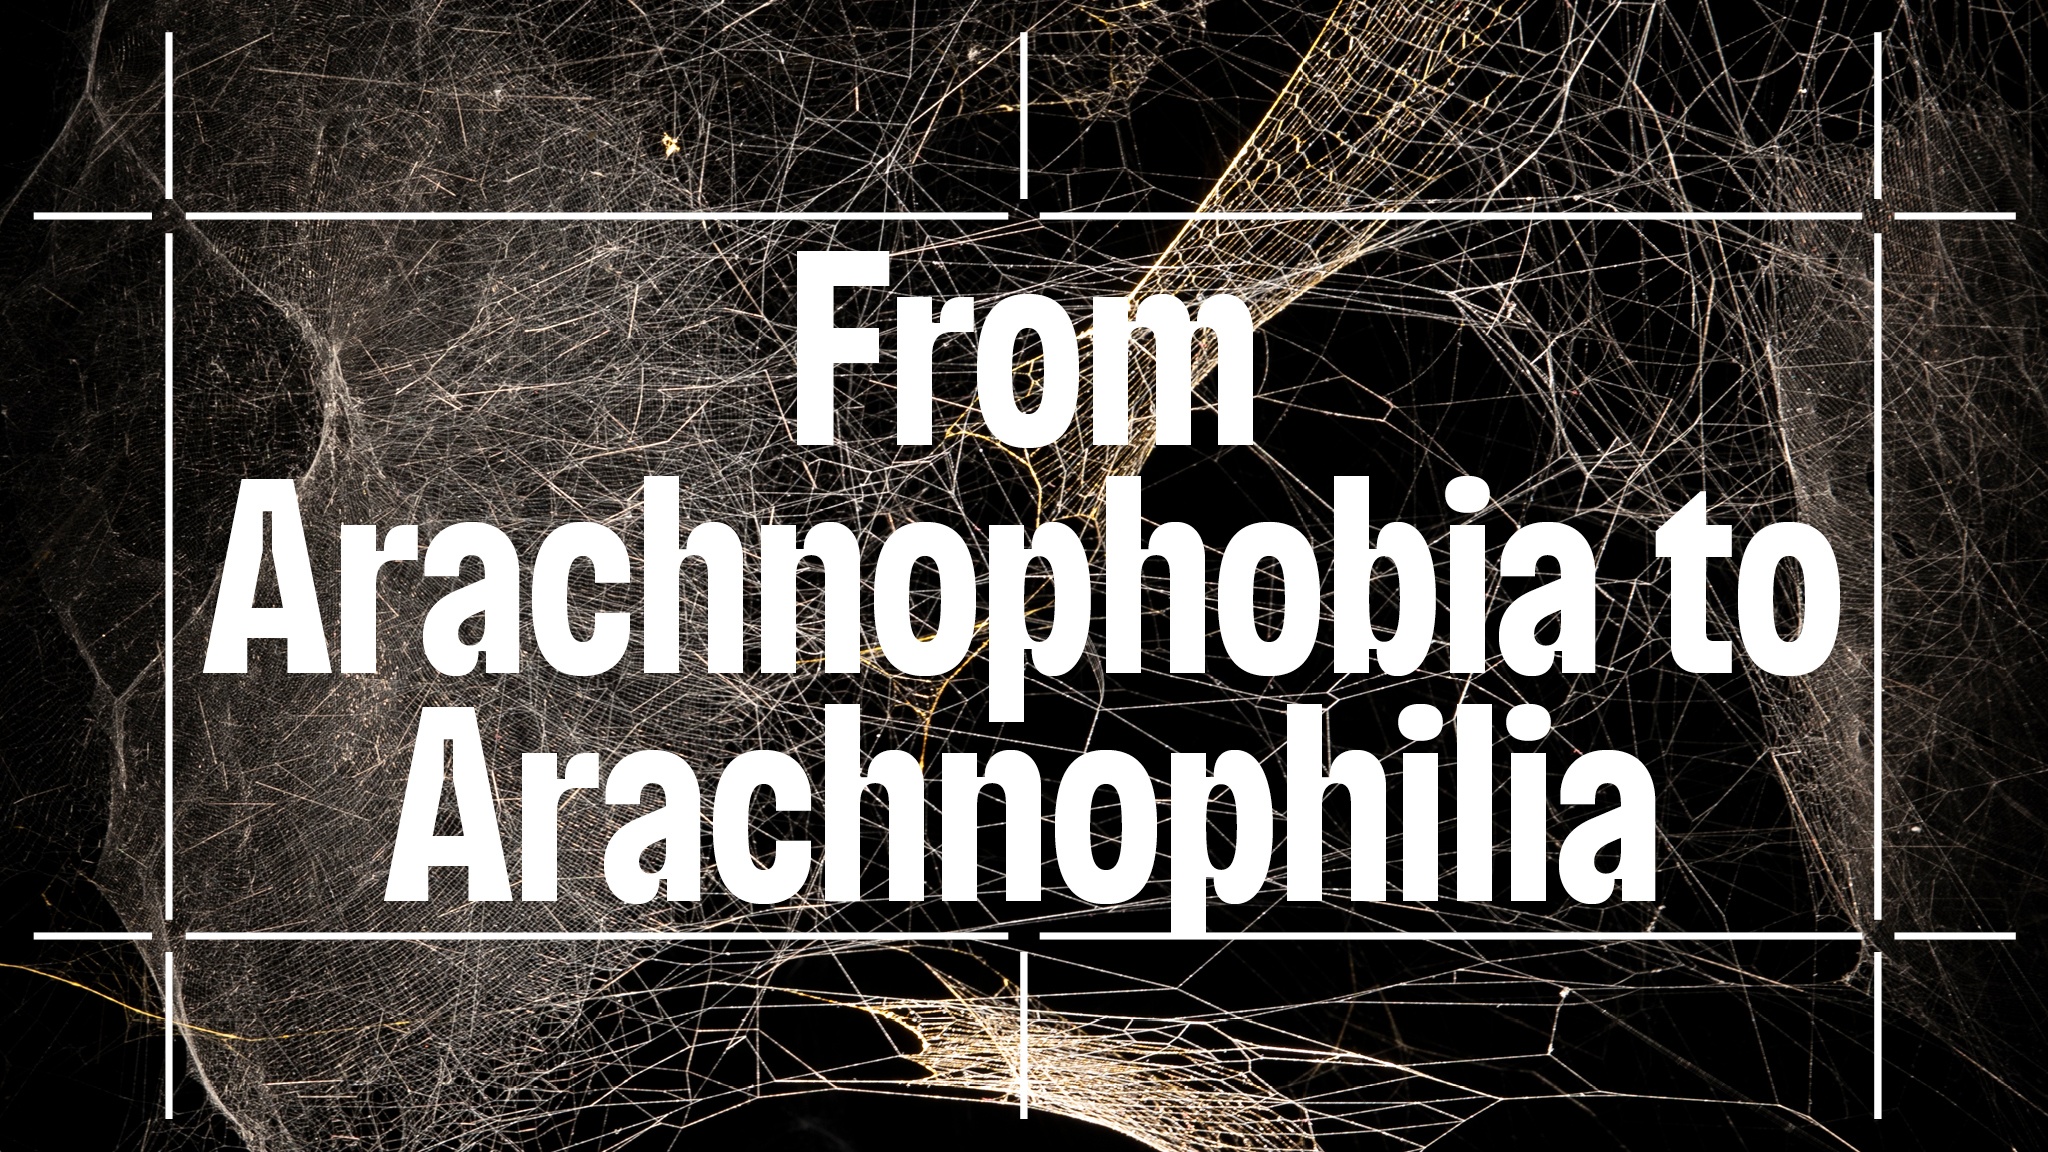 The event title "From Arachnophobia to Arachnophilia" overlaid on a photo of a dramatically lit spider web in a dark gallery space.